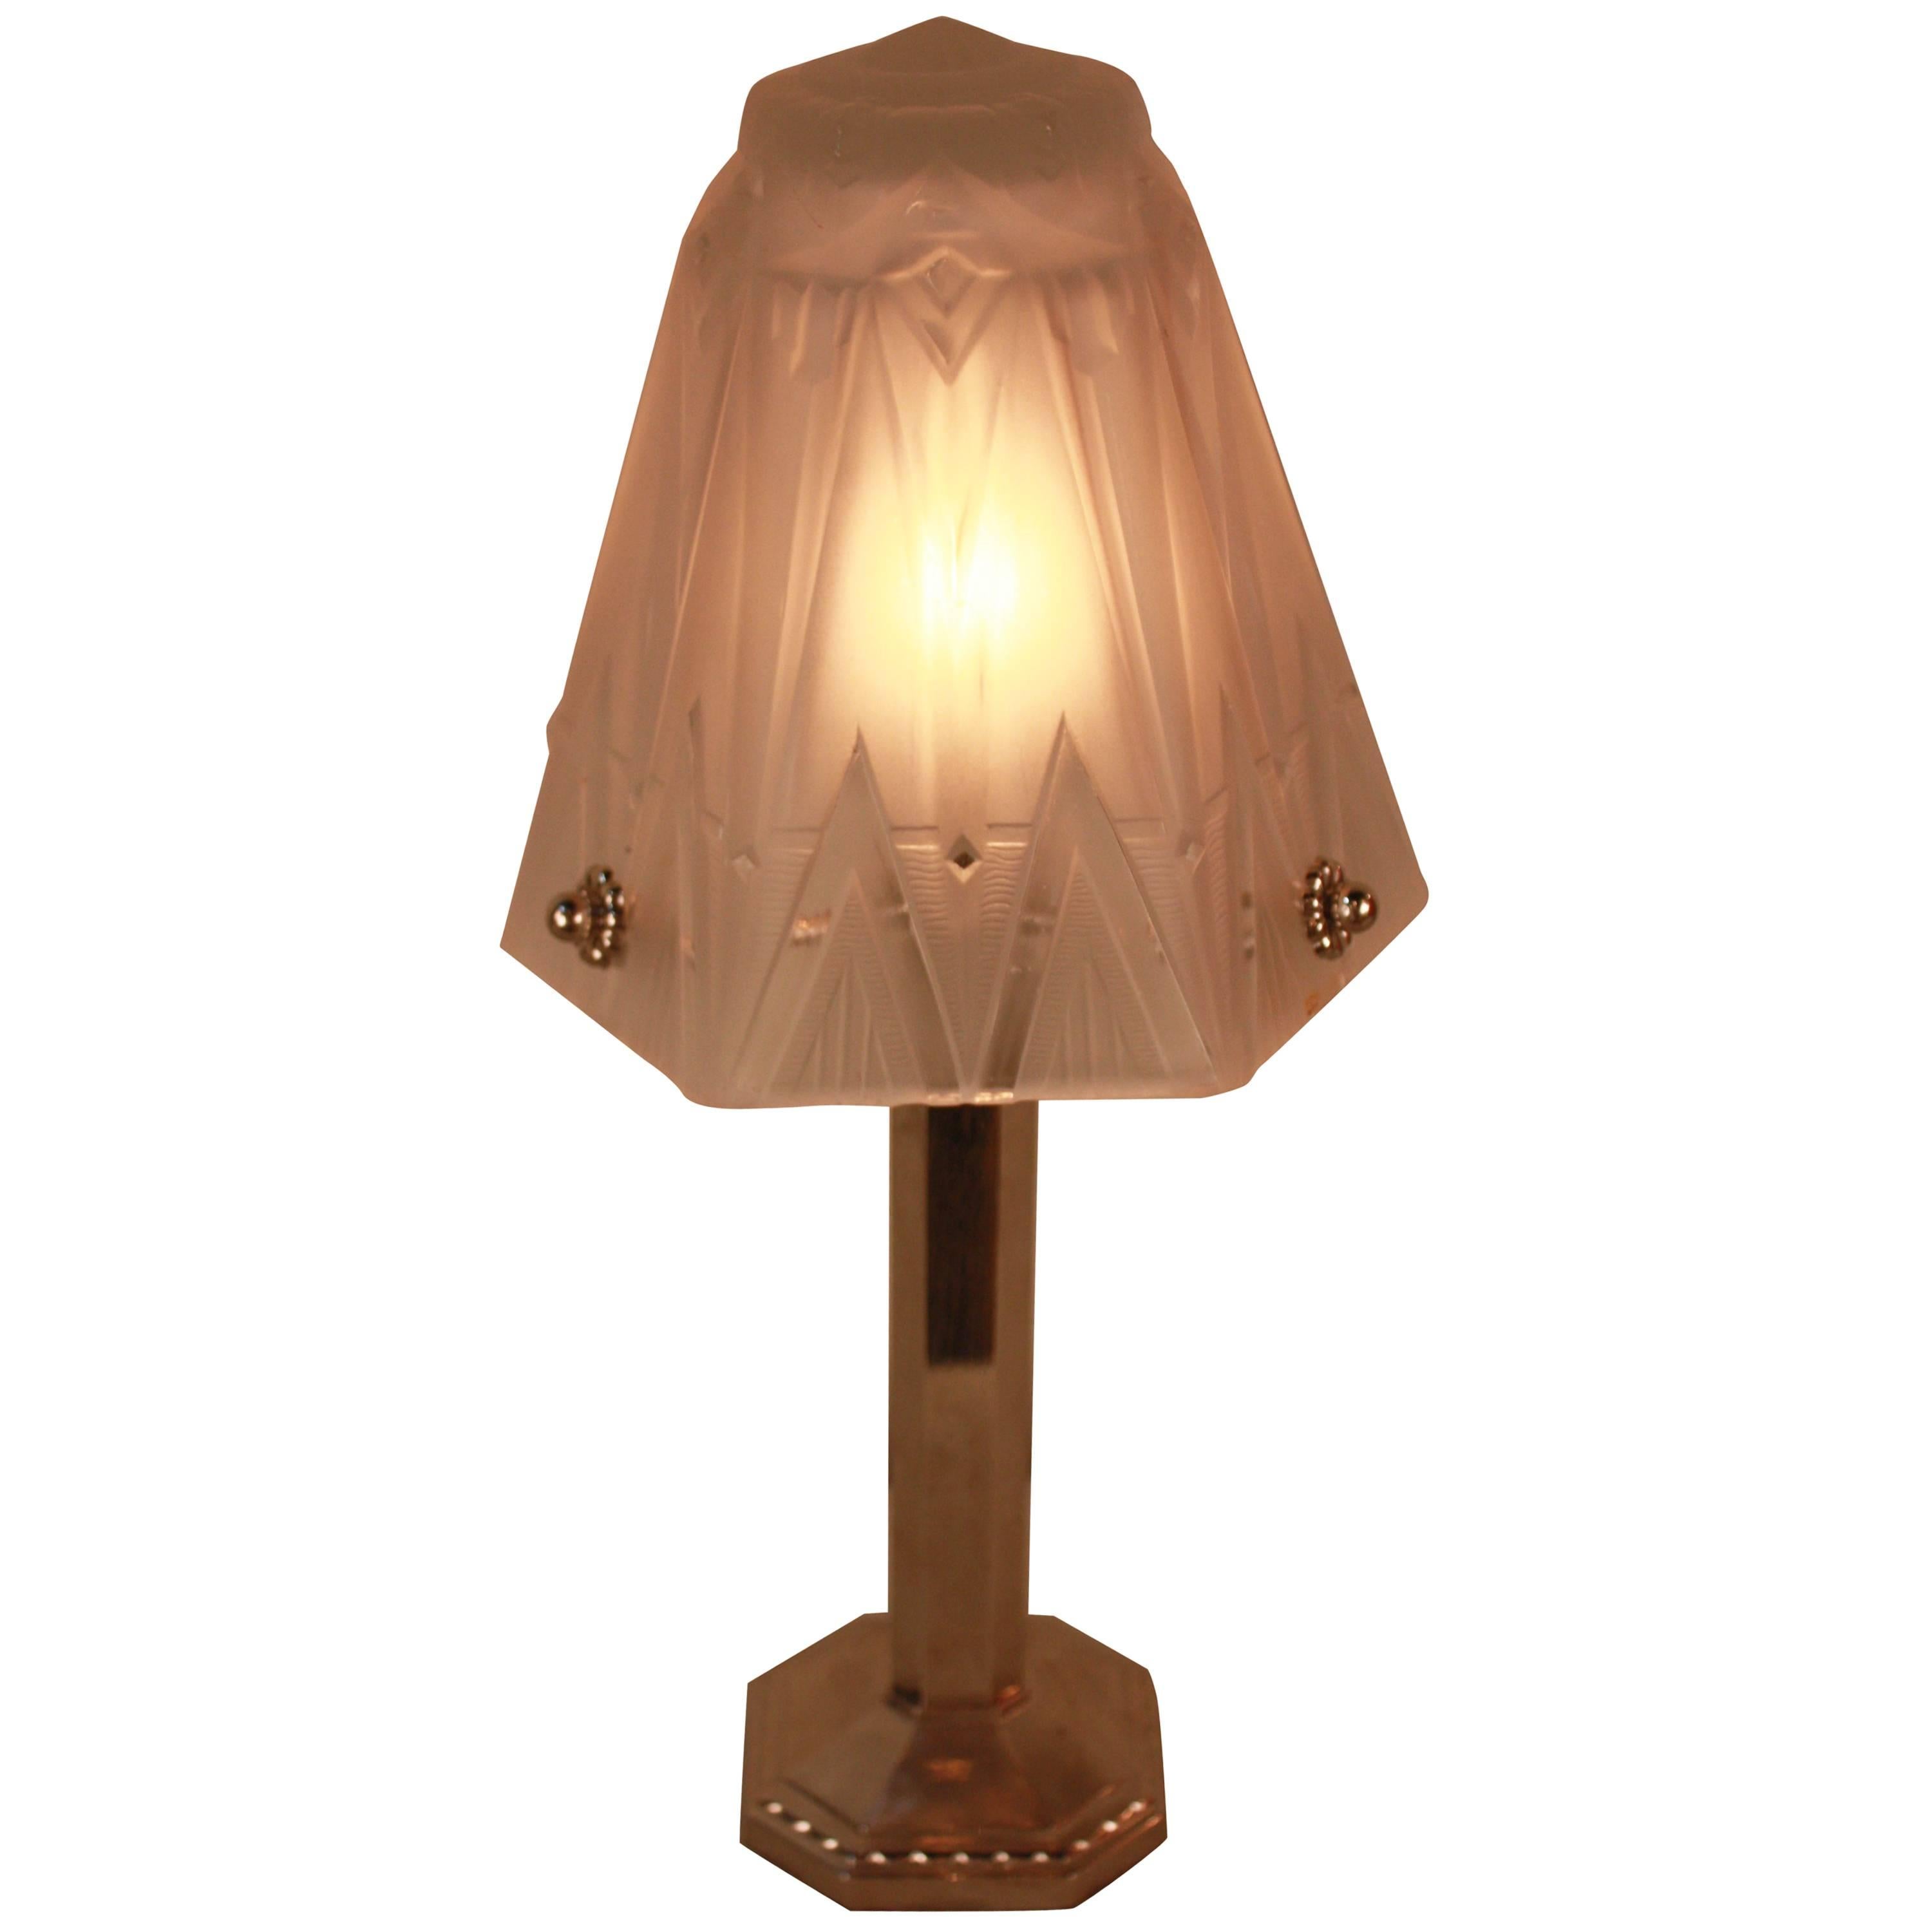 French Art Deco Table Lamp by Muller Freres